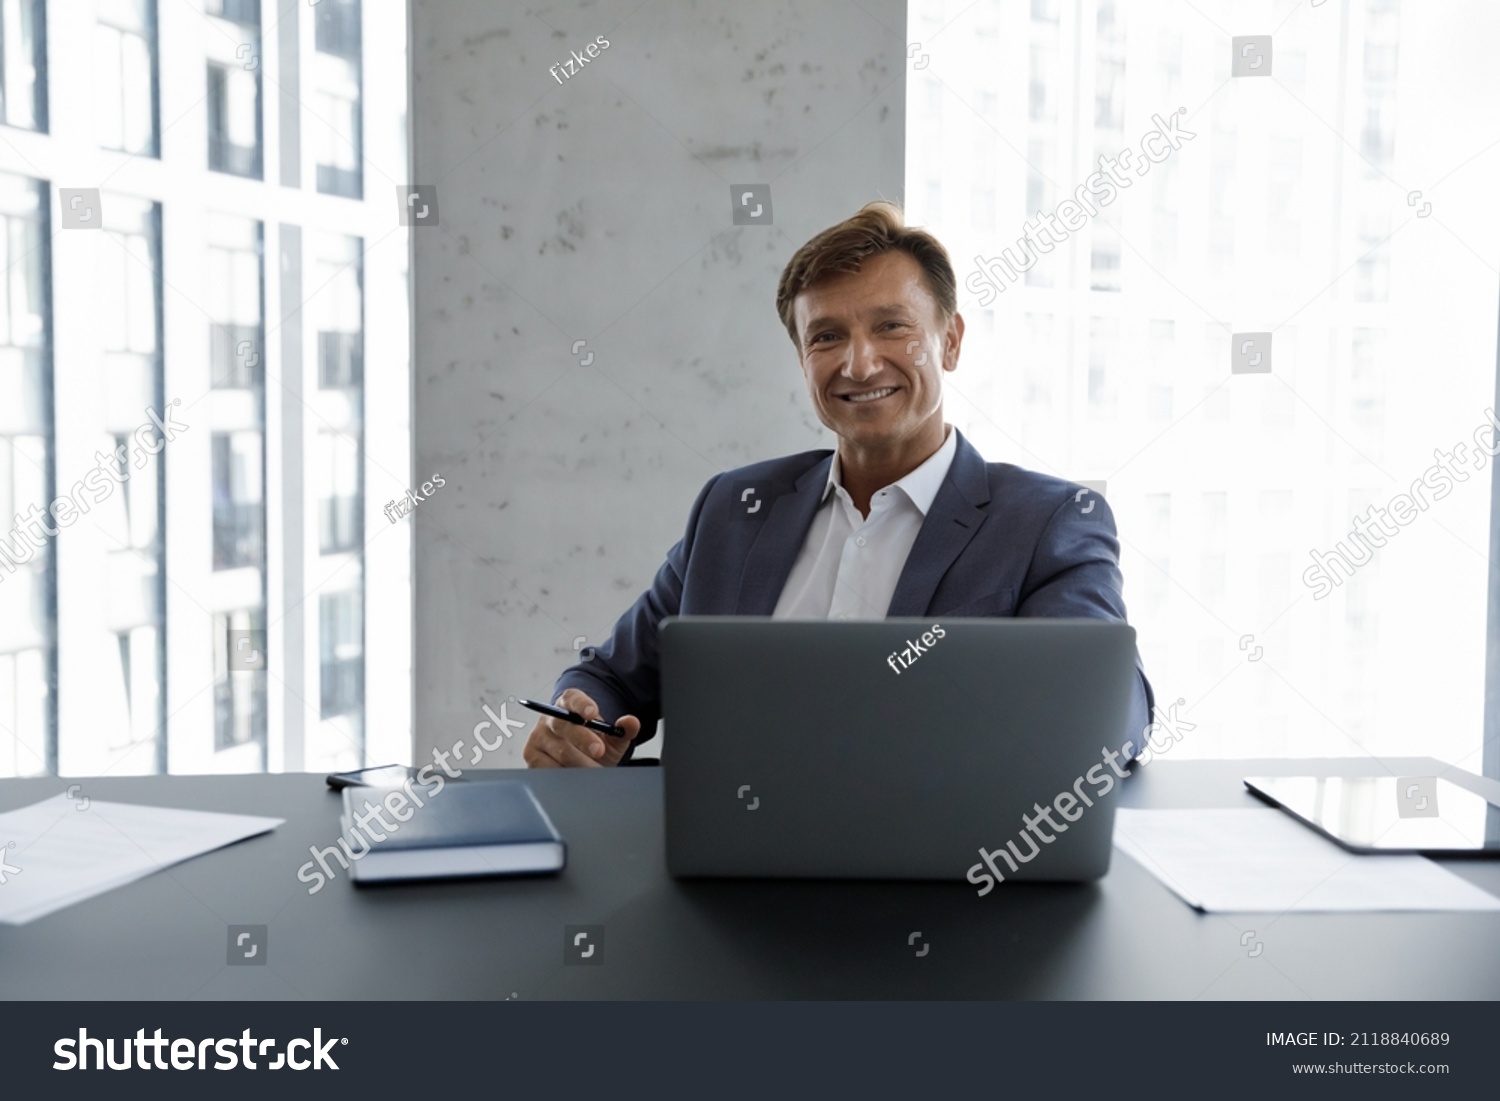 Happy mature businessman, company executive, CEO head shot portrait. Male business leader, professional, project owner sitting at work desk, laptop computer, looking at camera, smiling, #2118840689